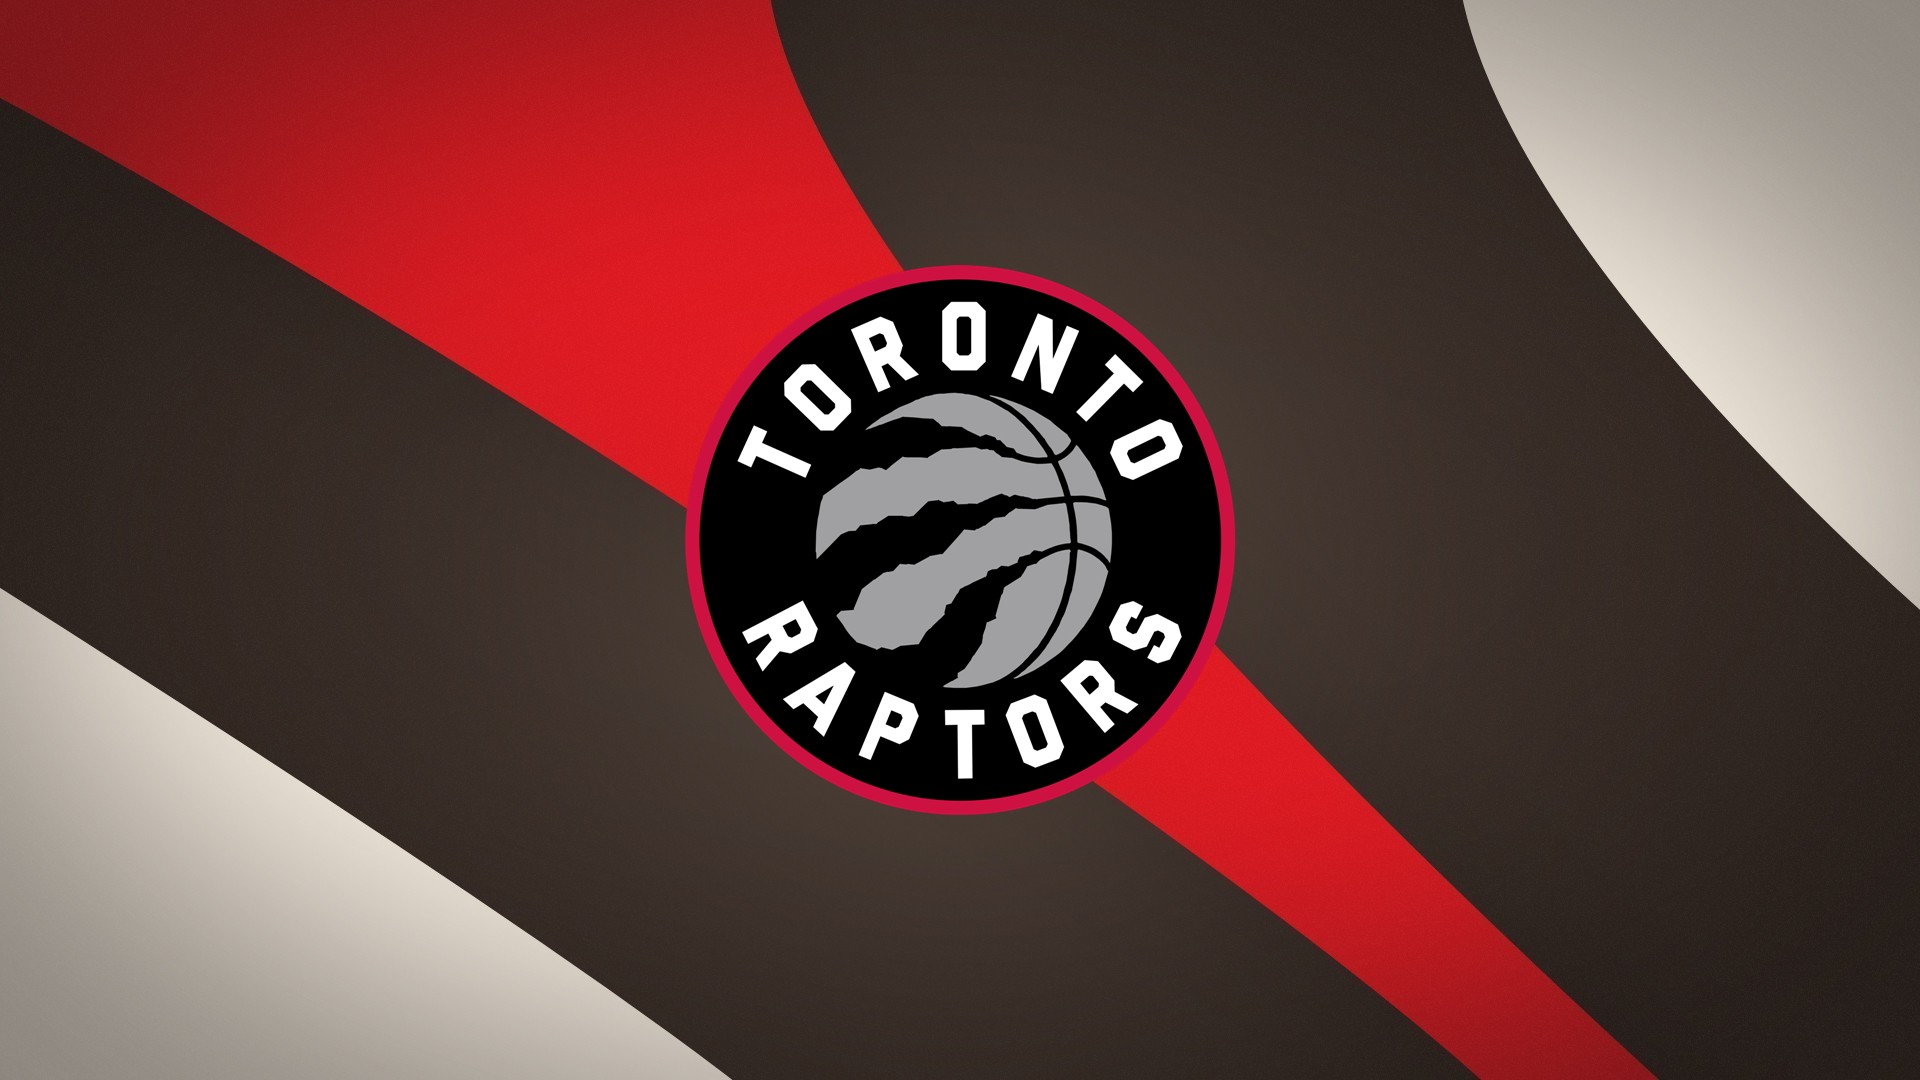 Raptors Basketball Mac Backgrounds with image dimensions 1920x1080 pixel. You can make this wallpaper for your Desktop Computer Backgrounds, Windows or Mac Screensavers, iPhone Lock screen, Tablet or Android and another Mobile Phone device